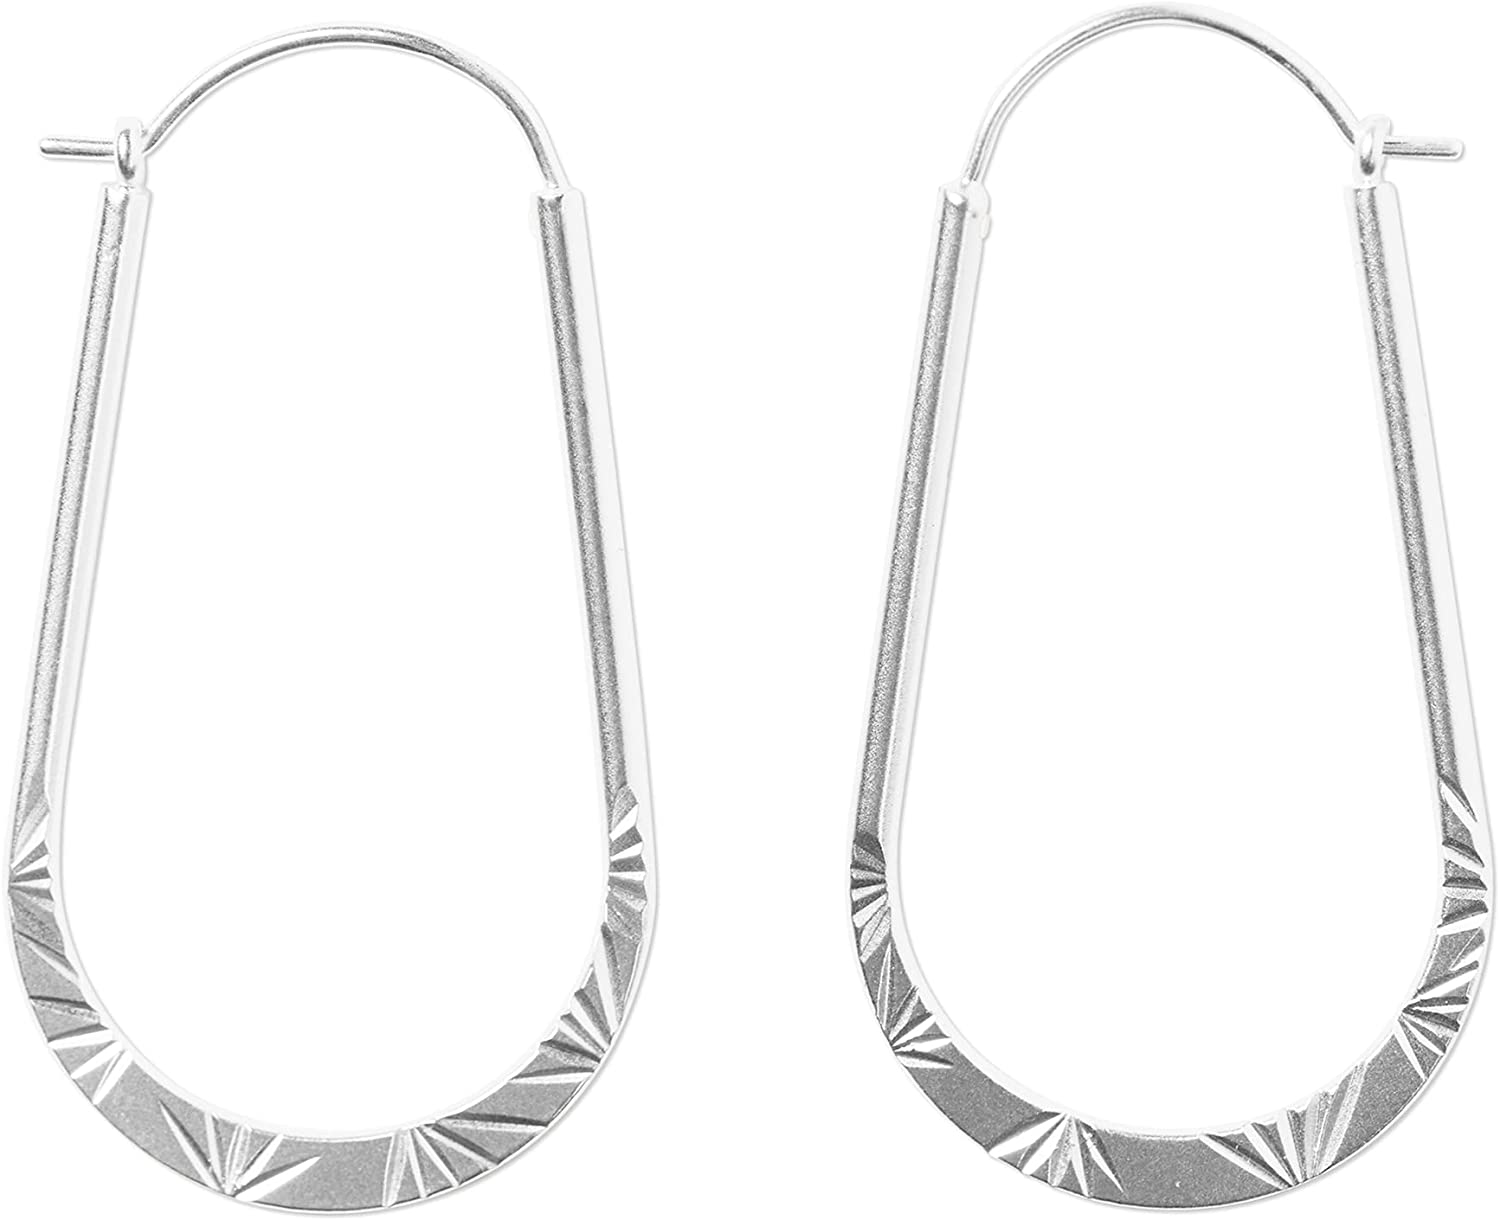 Sunbeam Etched Oval Earrings,Silver,One Size